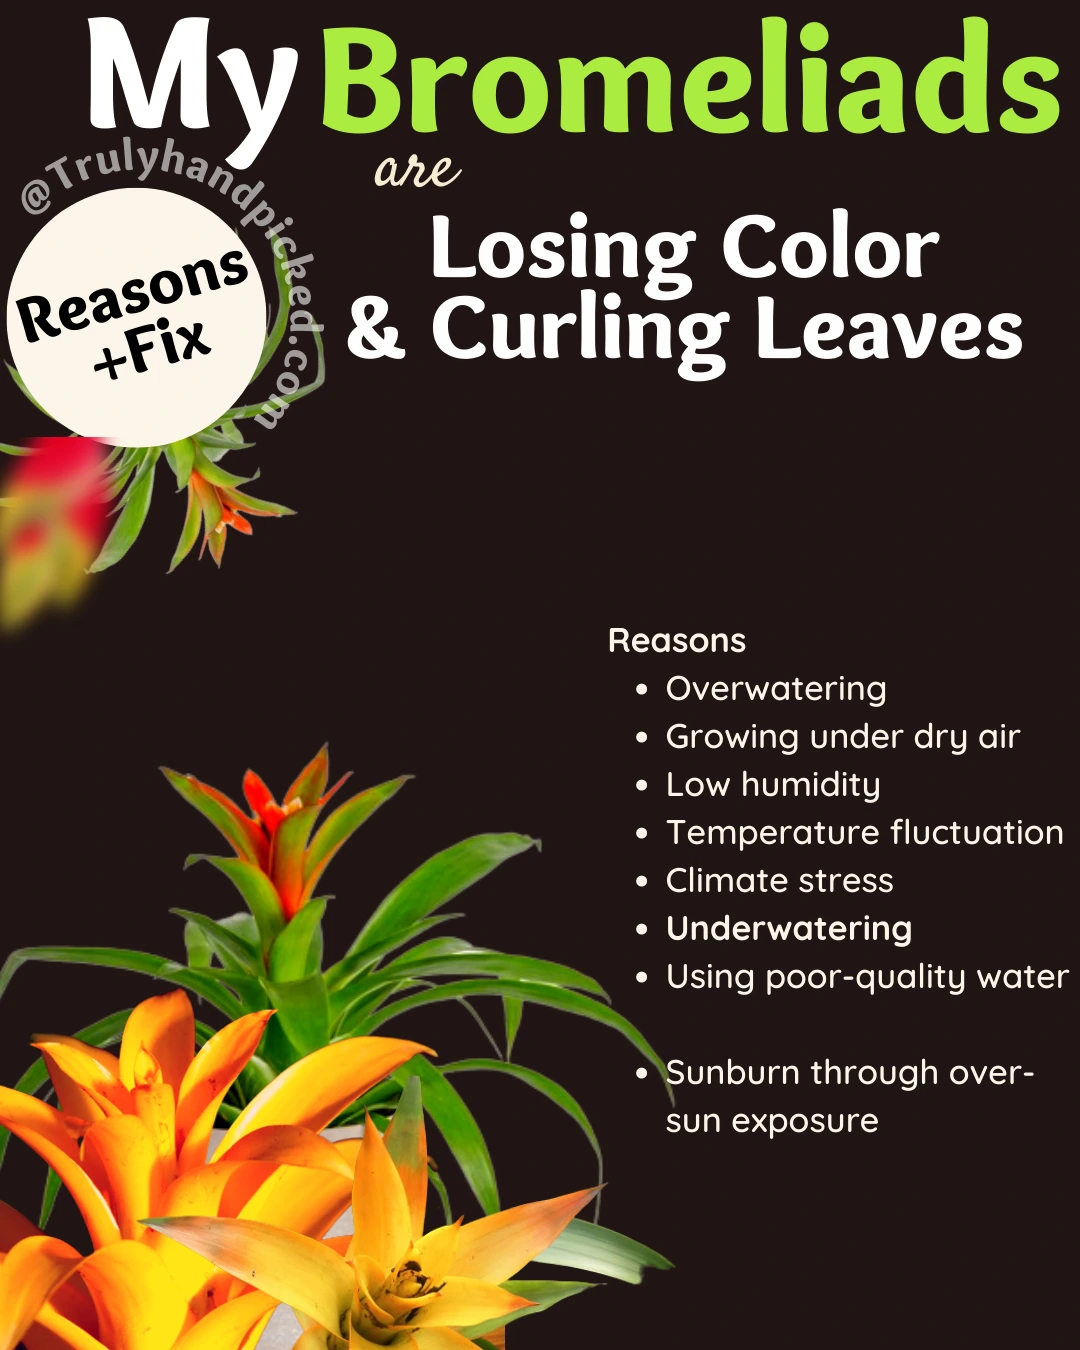 Why My Bromeliads are Losing Colors and Curling Leaves